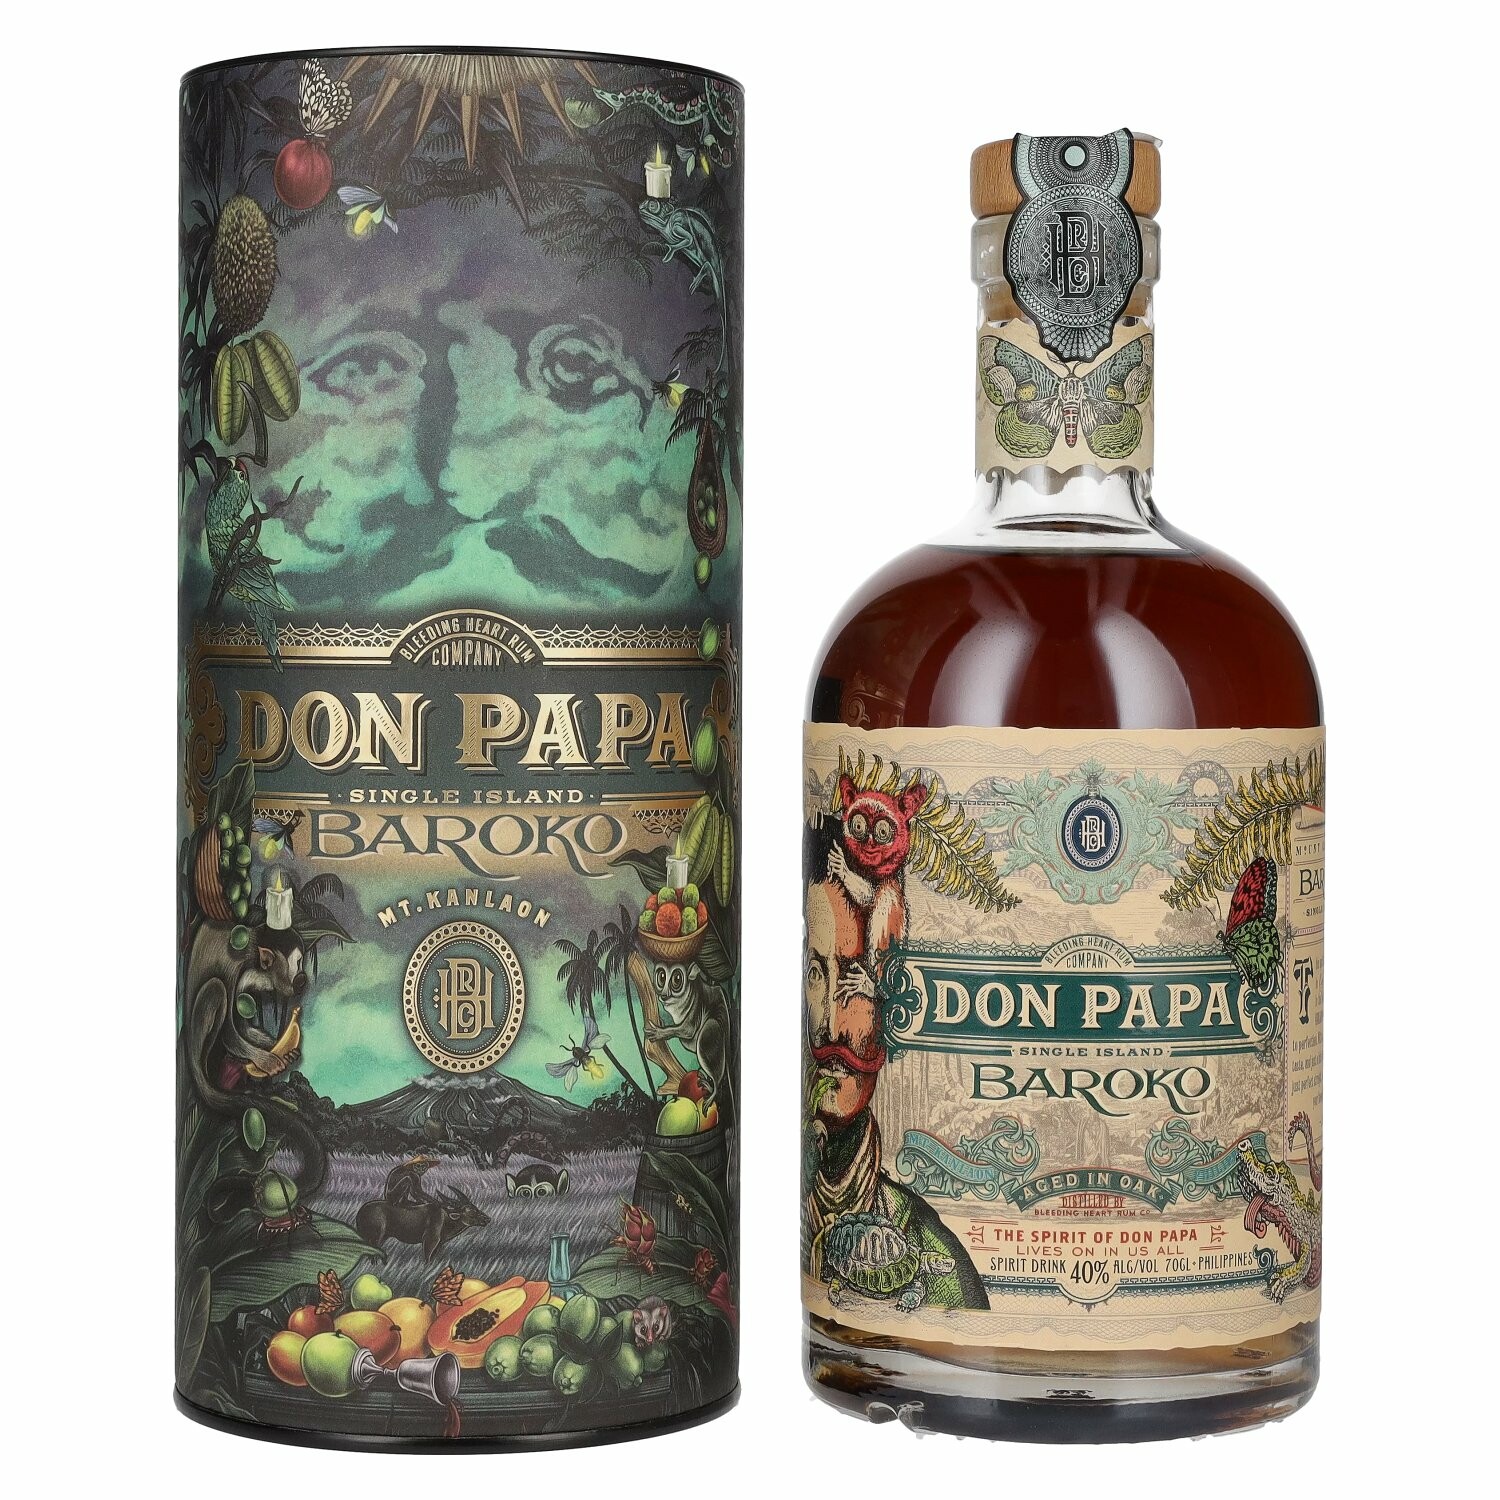 Don Papa BAROKO Limited Edition Harvest Canister 40% Vol. 0,7l in Giftbox